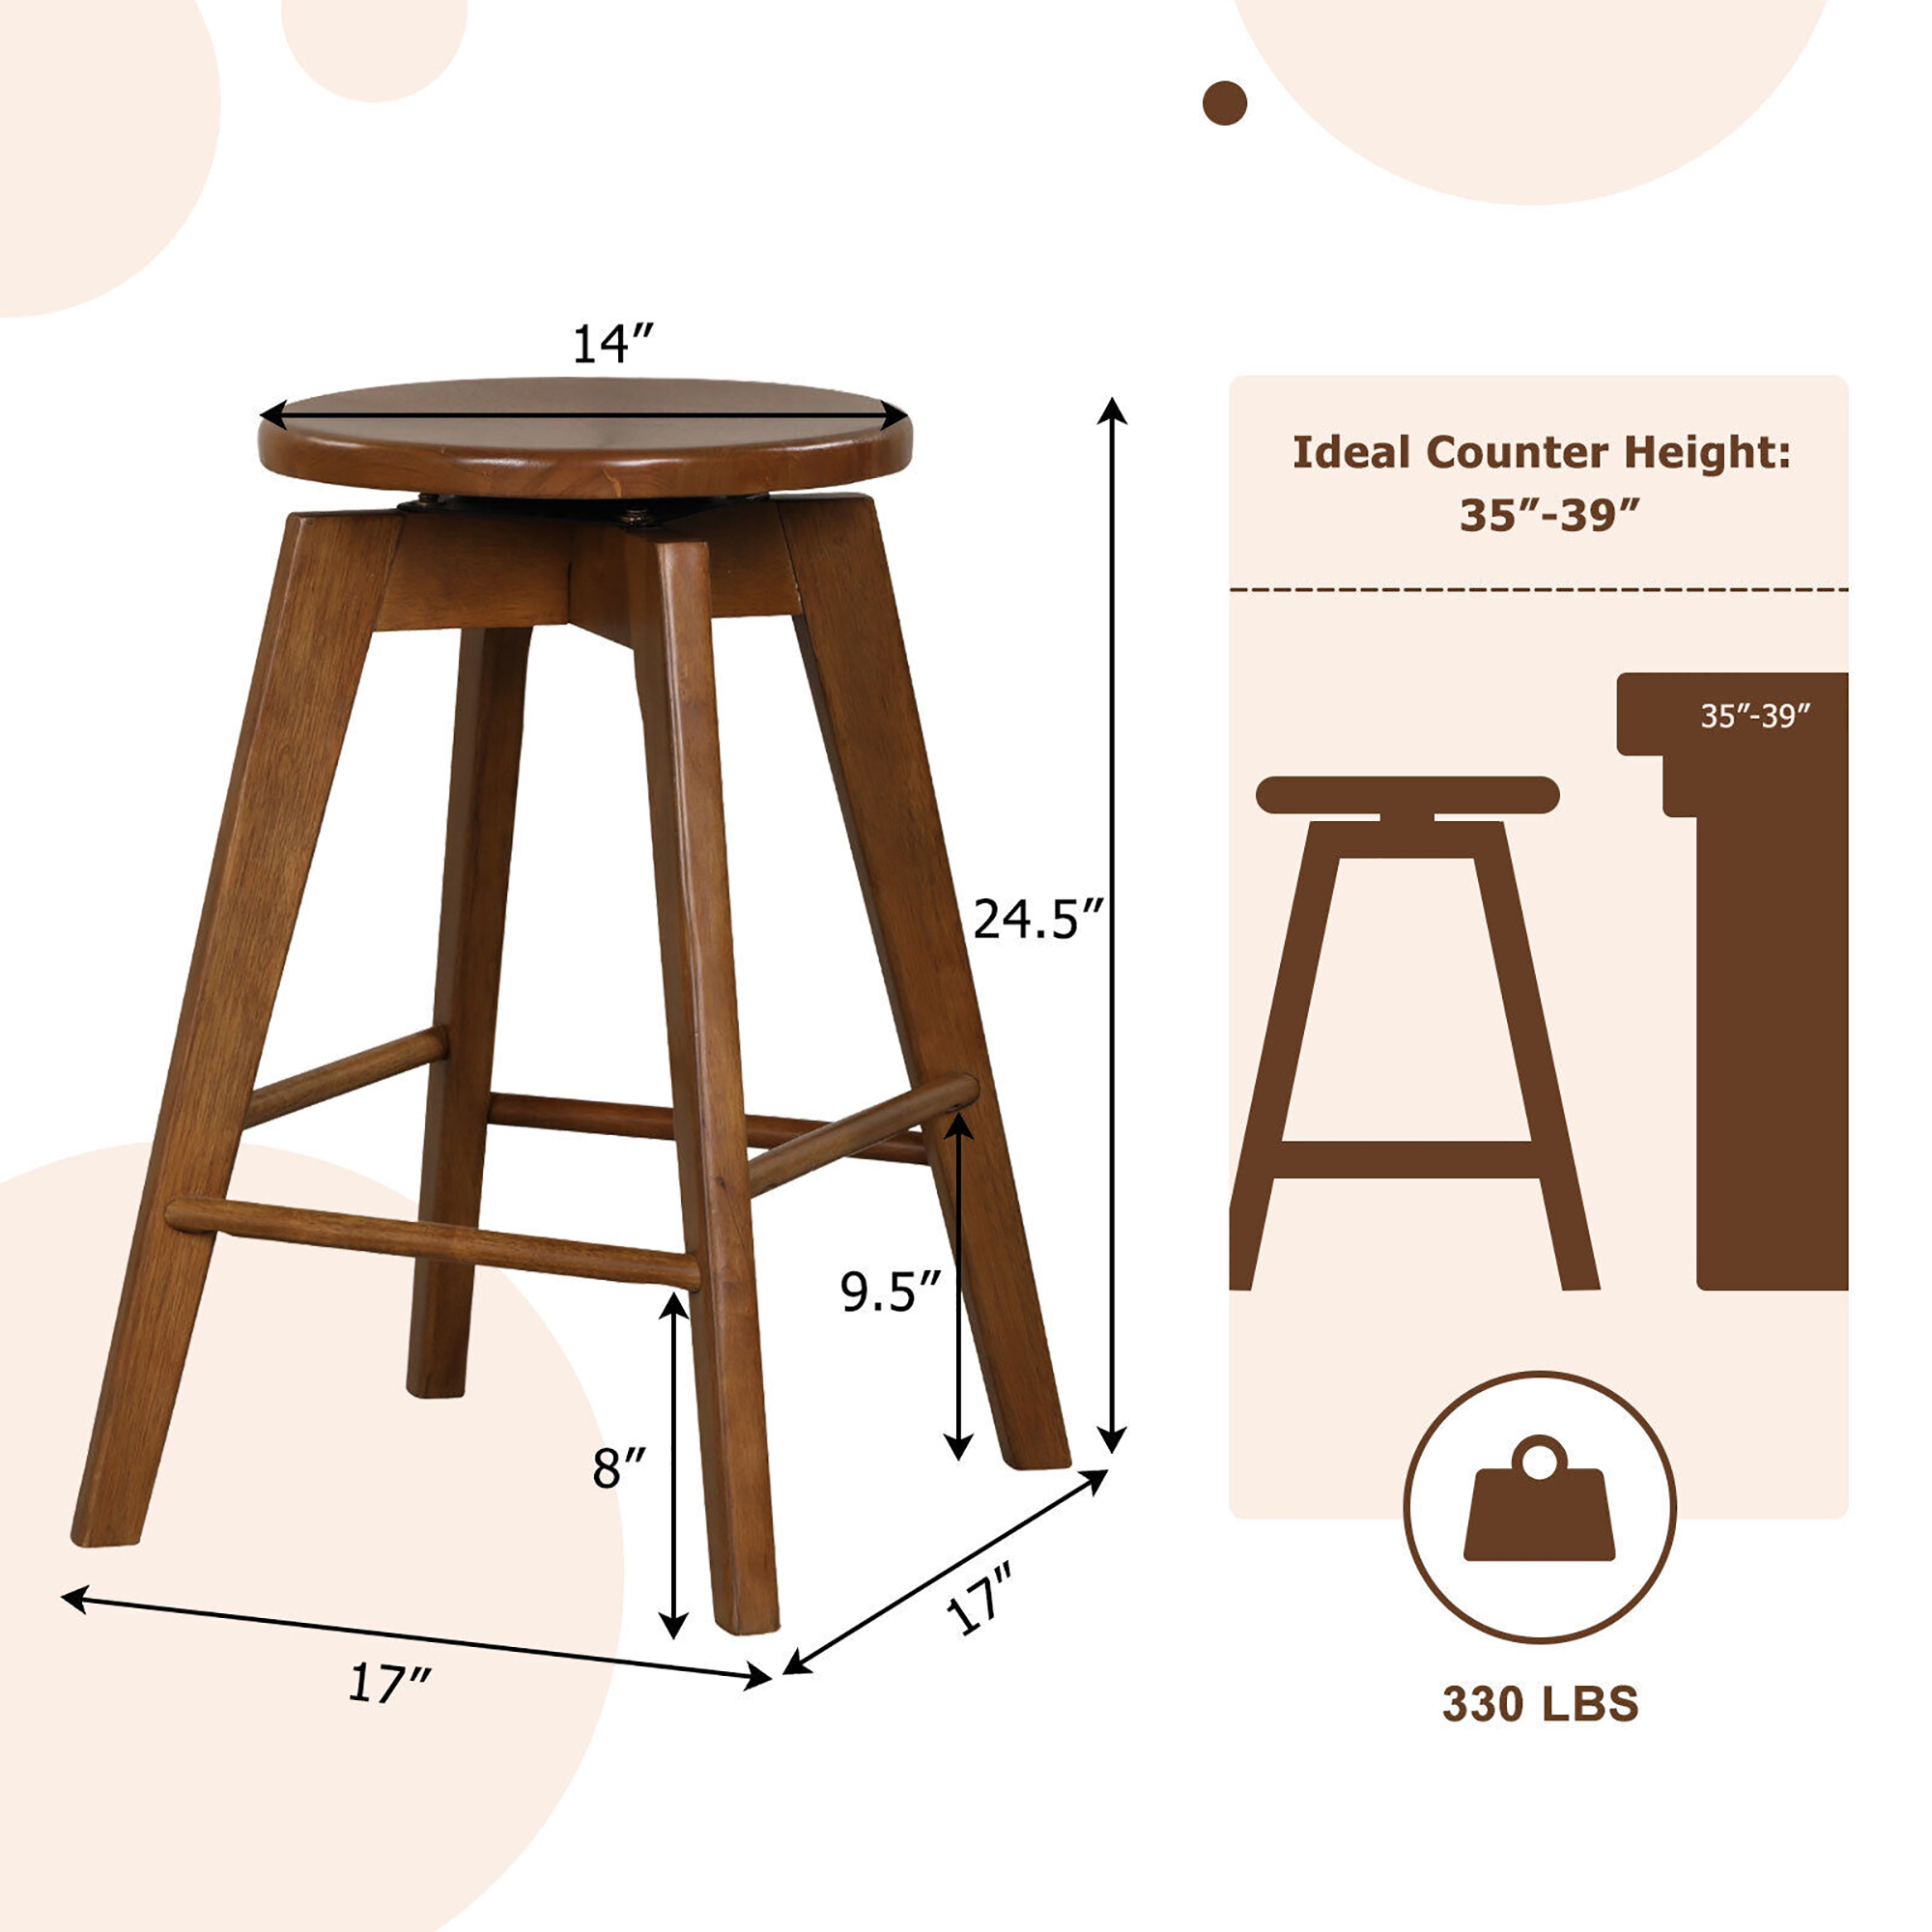 Gymax Set of 2 Swivel Round Bar Stools Counter Height Dining Chairs w/ Rubber Wood Legs